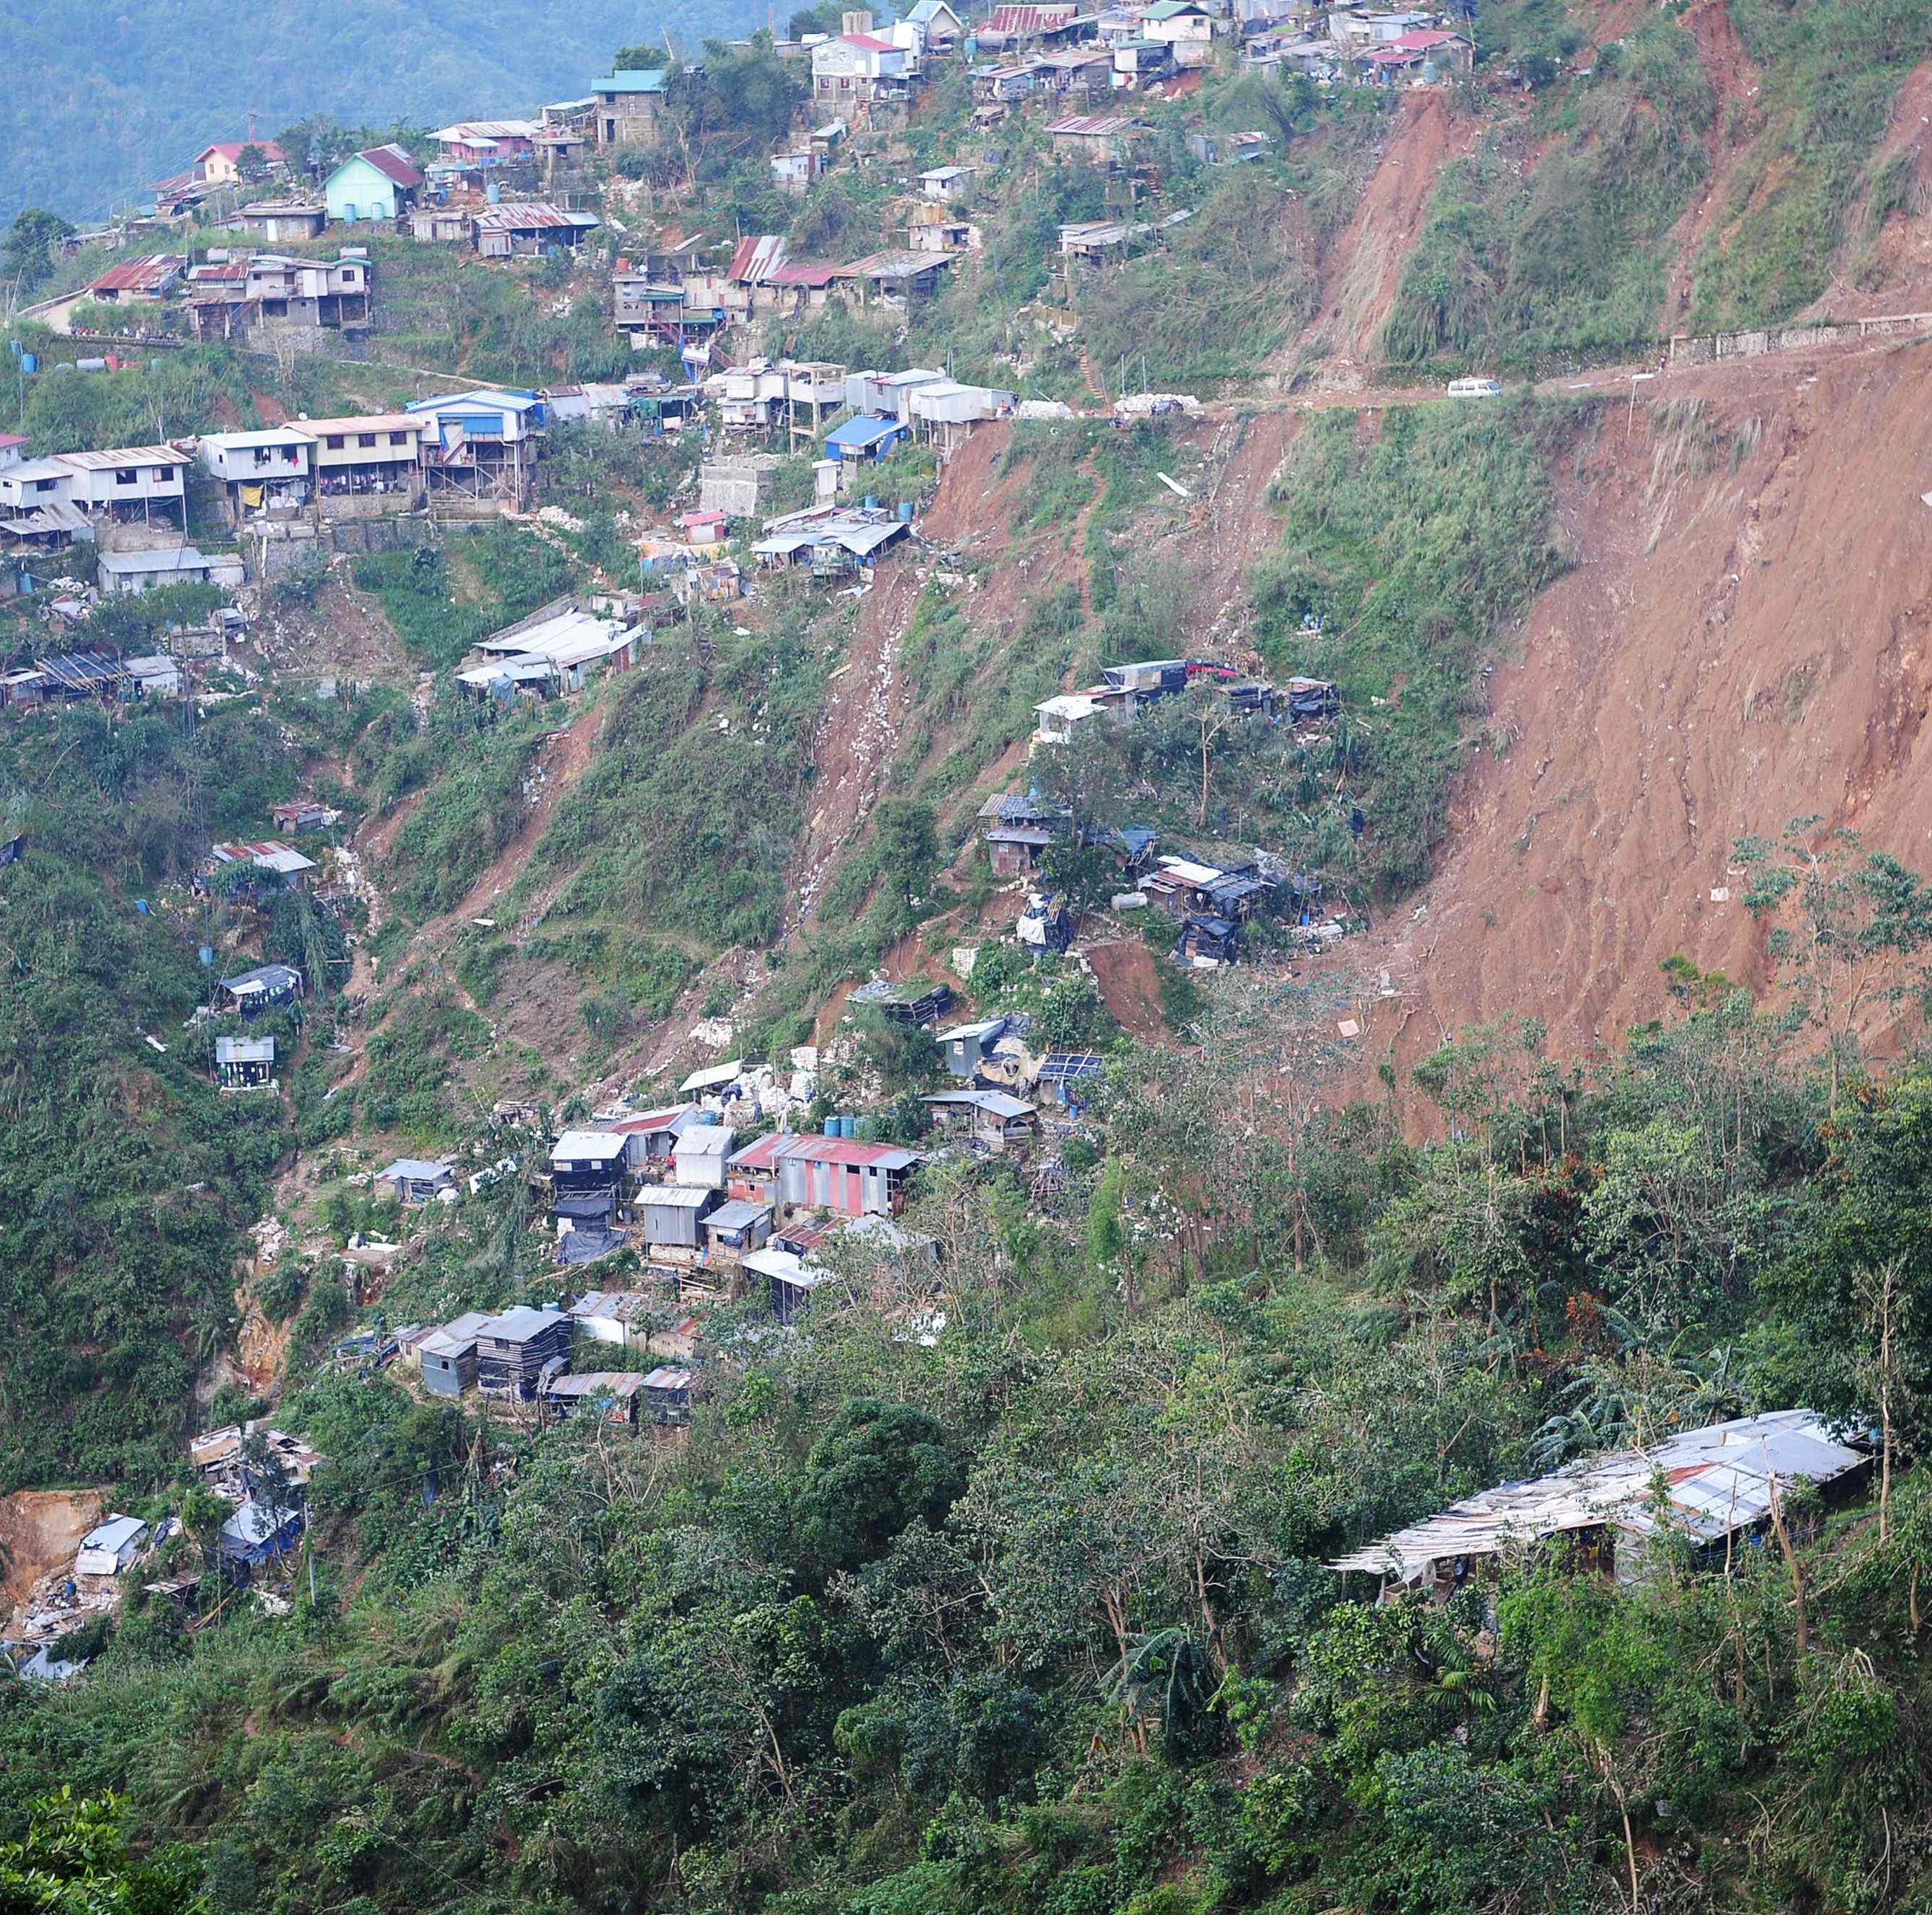 A general view shows the landslide site due to heavy rains brought by Typhoon Mangkhut in Itogon, Benguet province on September 17. Philippine rescuers used shovels and their bare hands to claw through mounds of rocky soil, as they desperately looked